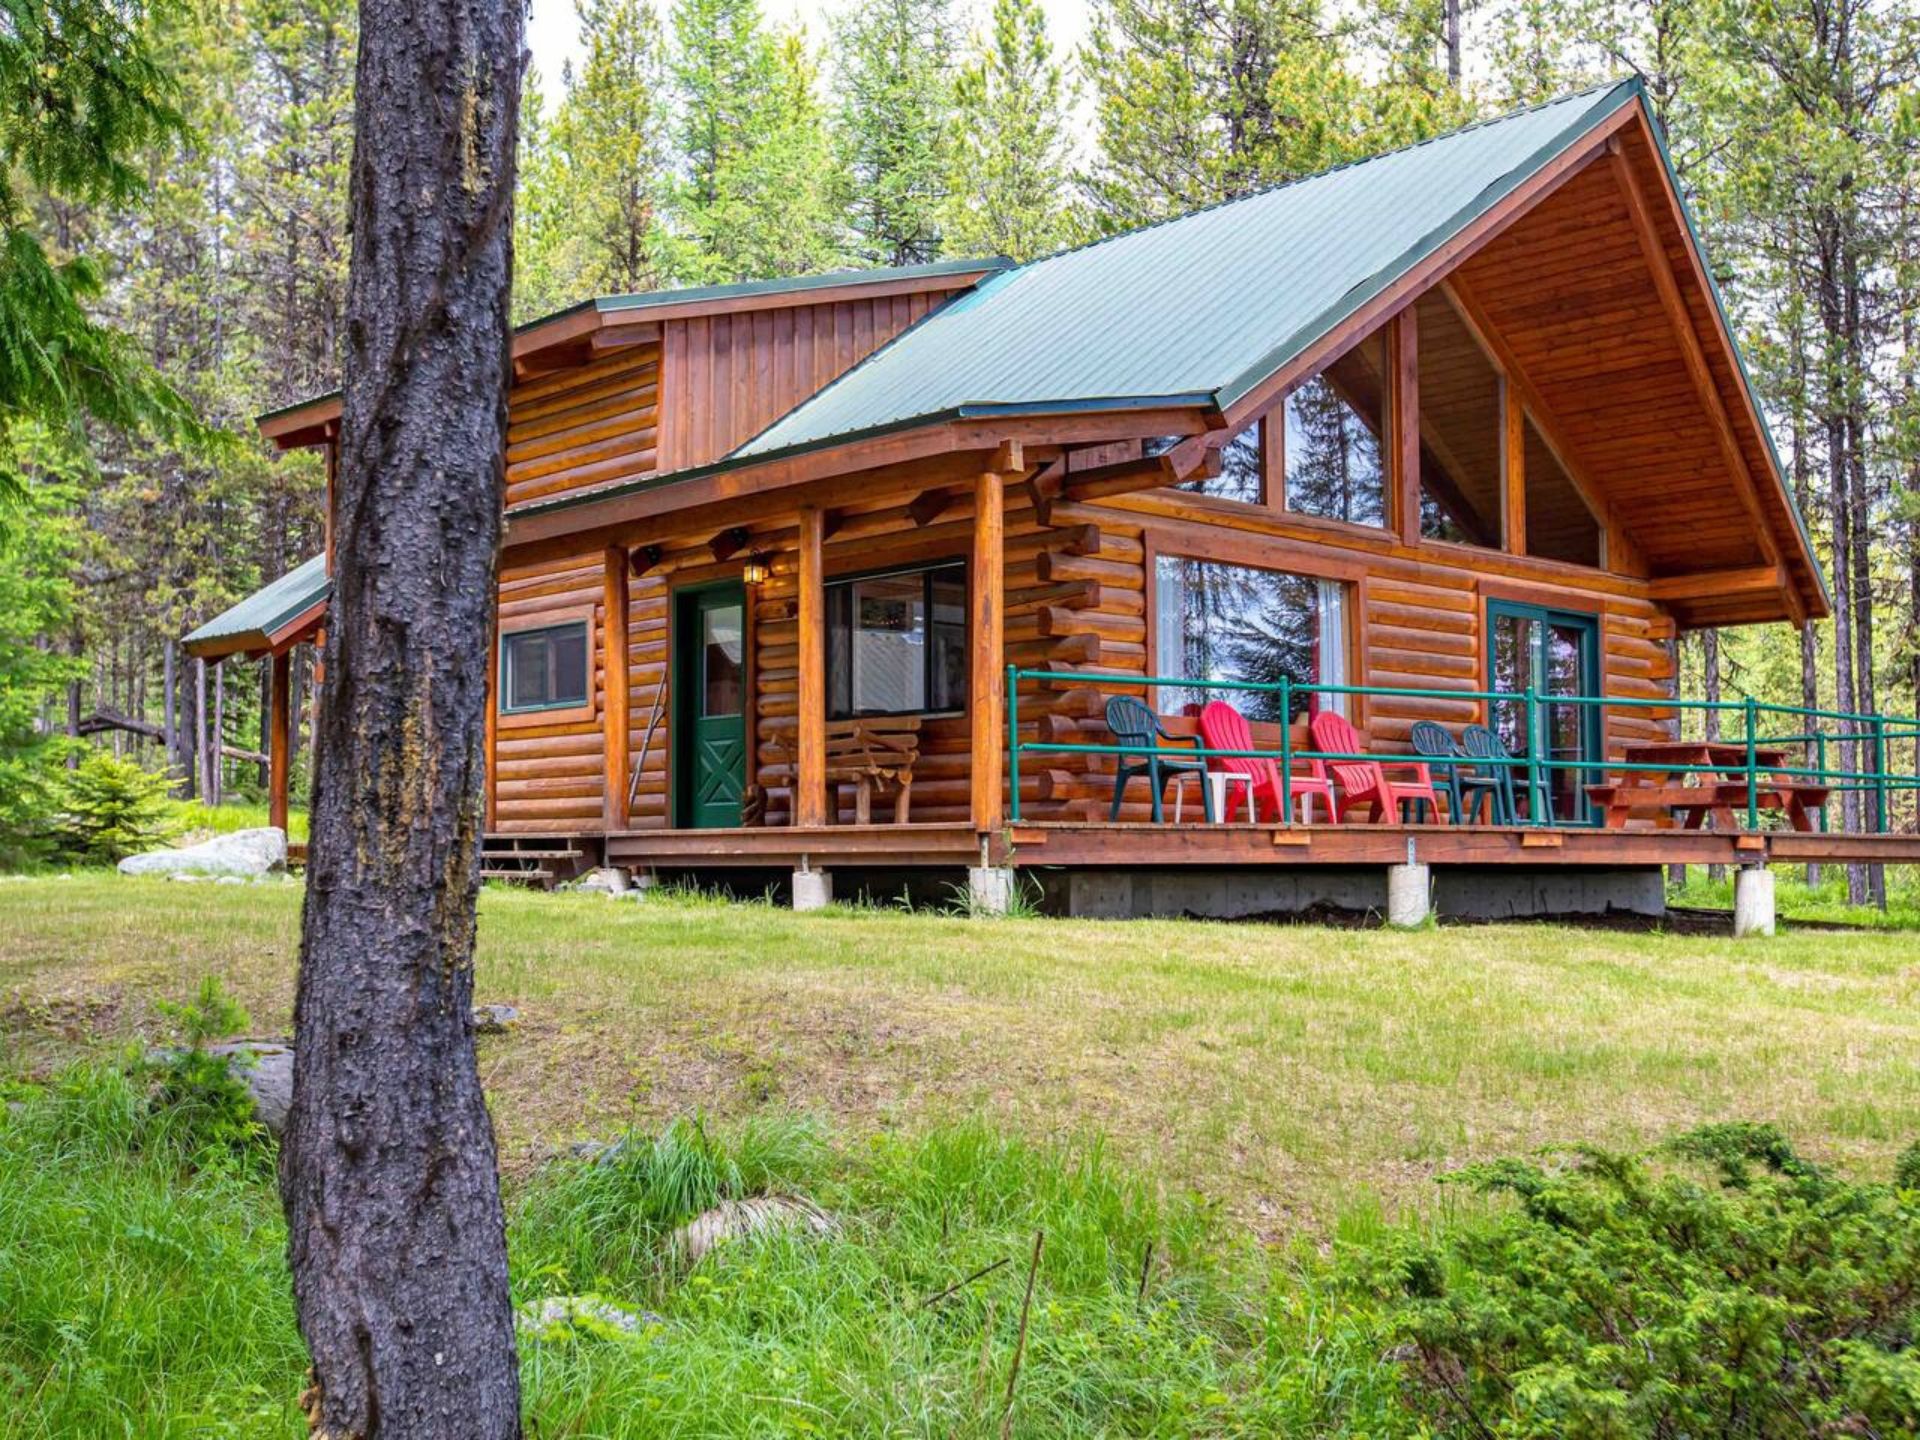 Relax And Enjoy In This Wooden Cabin Home In The Middle Of Nowhere